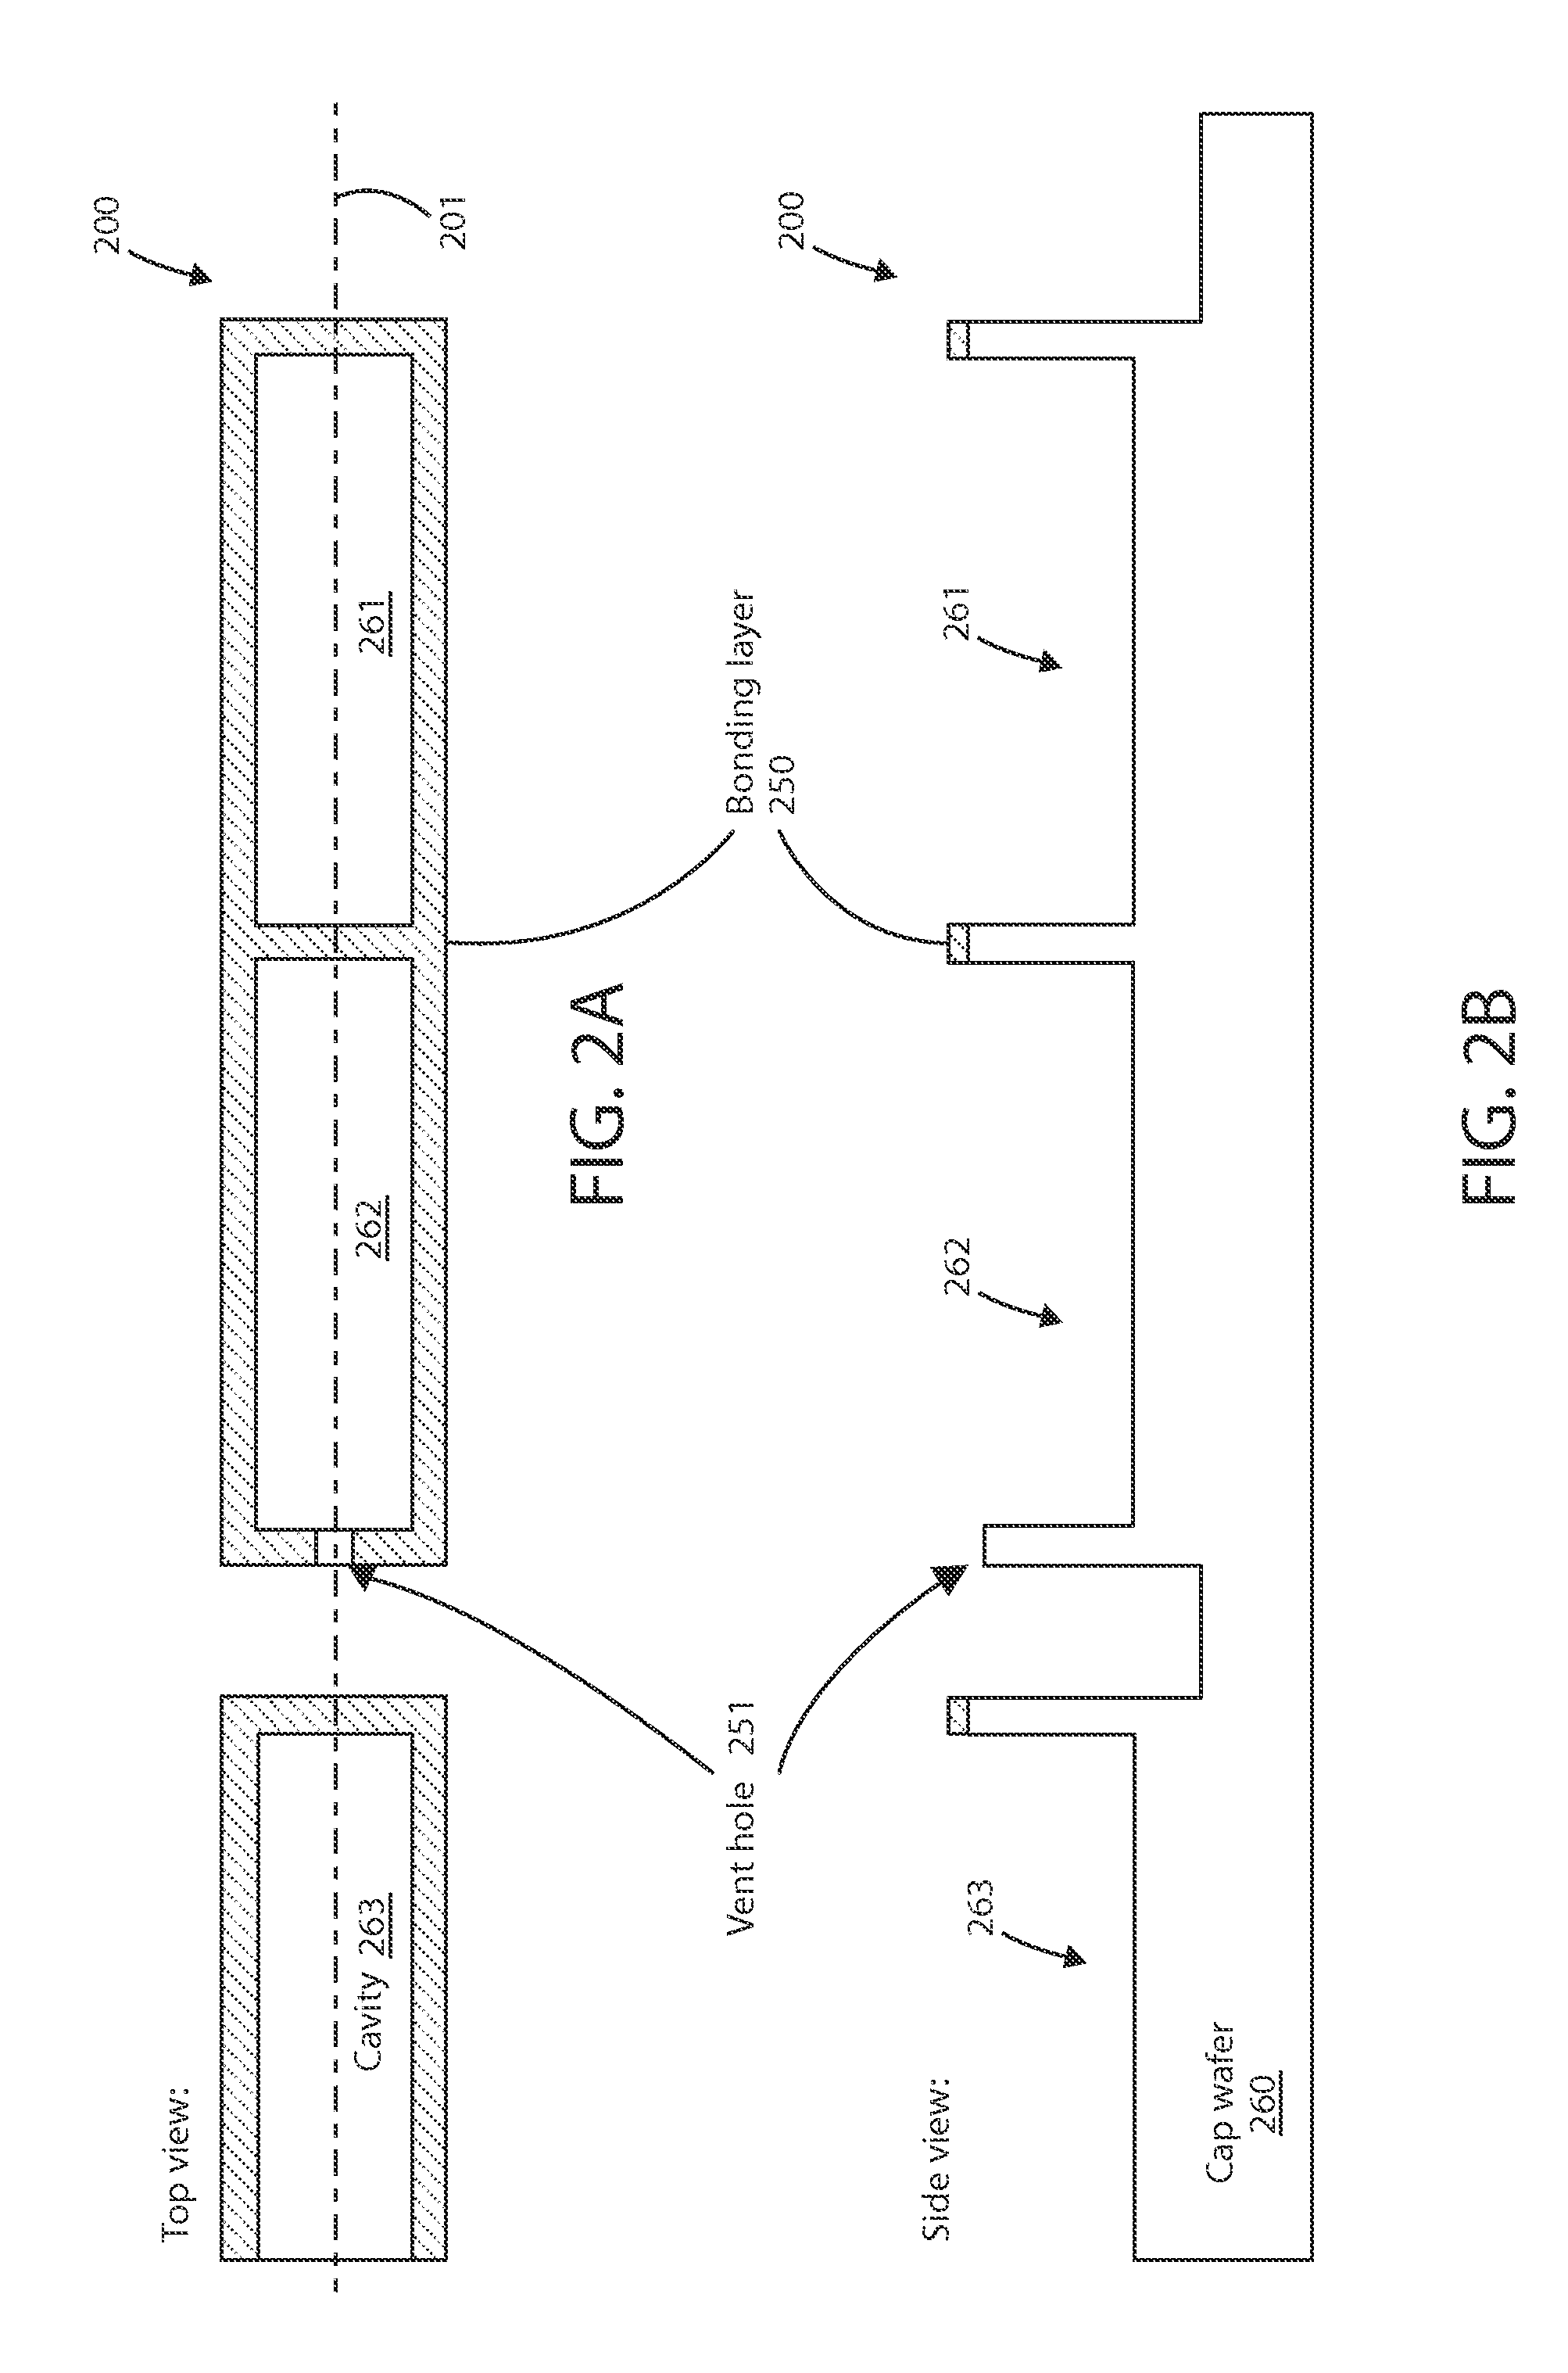 Method to package multiple MEMS sensors and actuators at different gases and cavity pressures